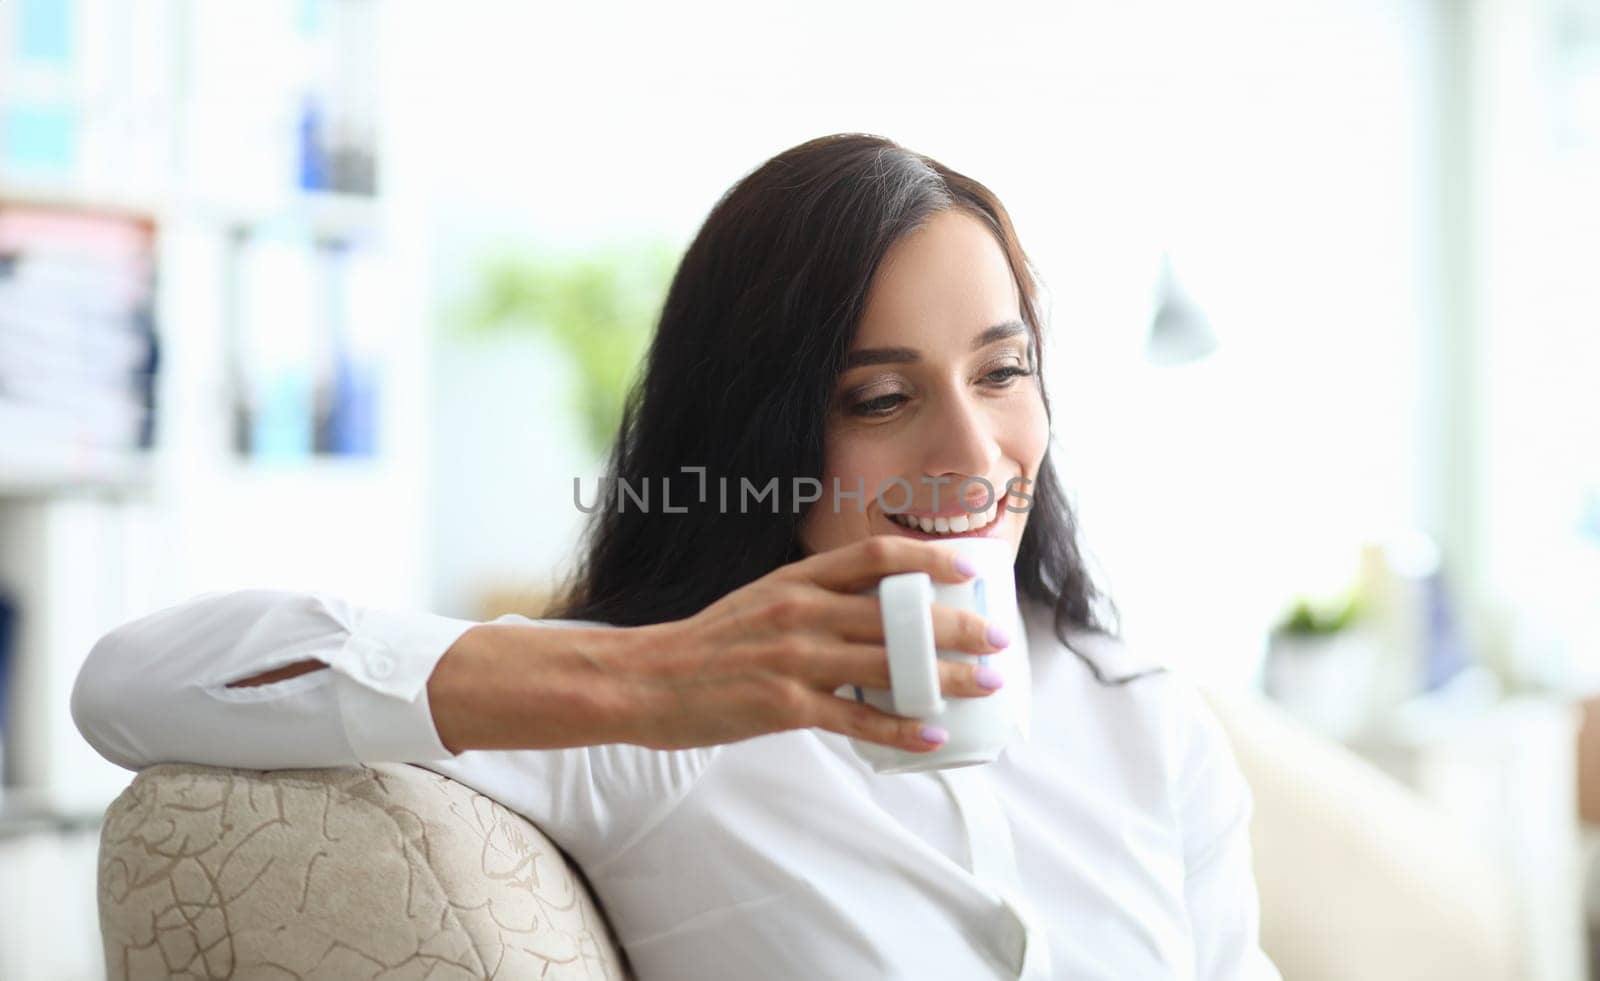 Young woman drinks from cup while sitting on couch. Drinking regimen of day concept